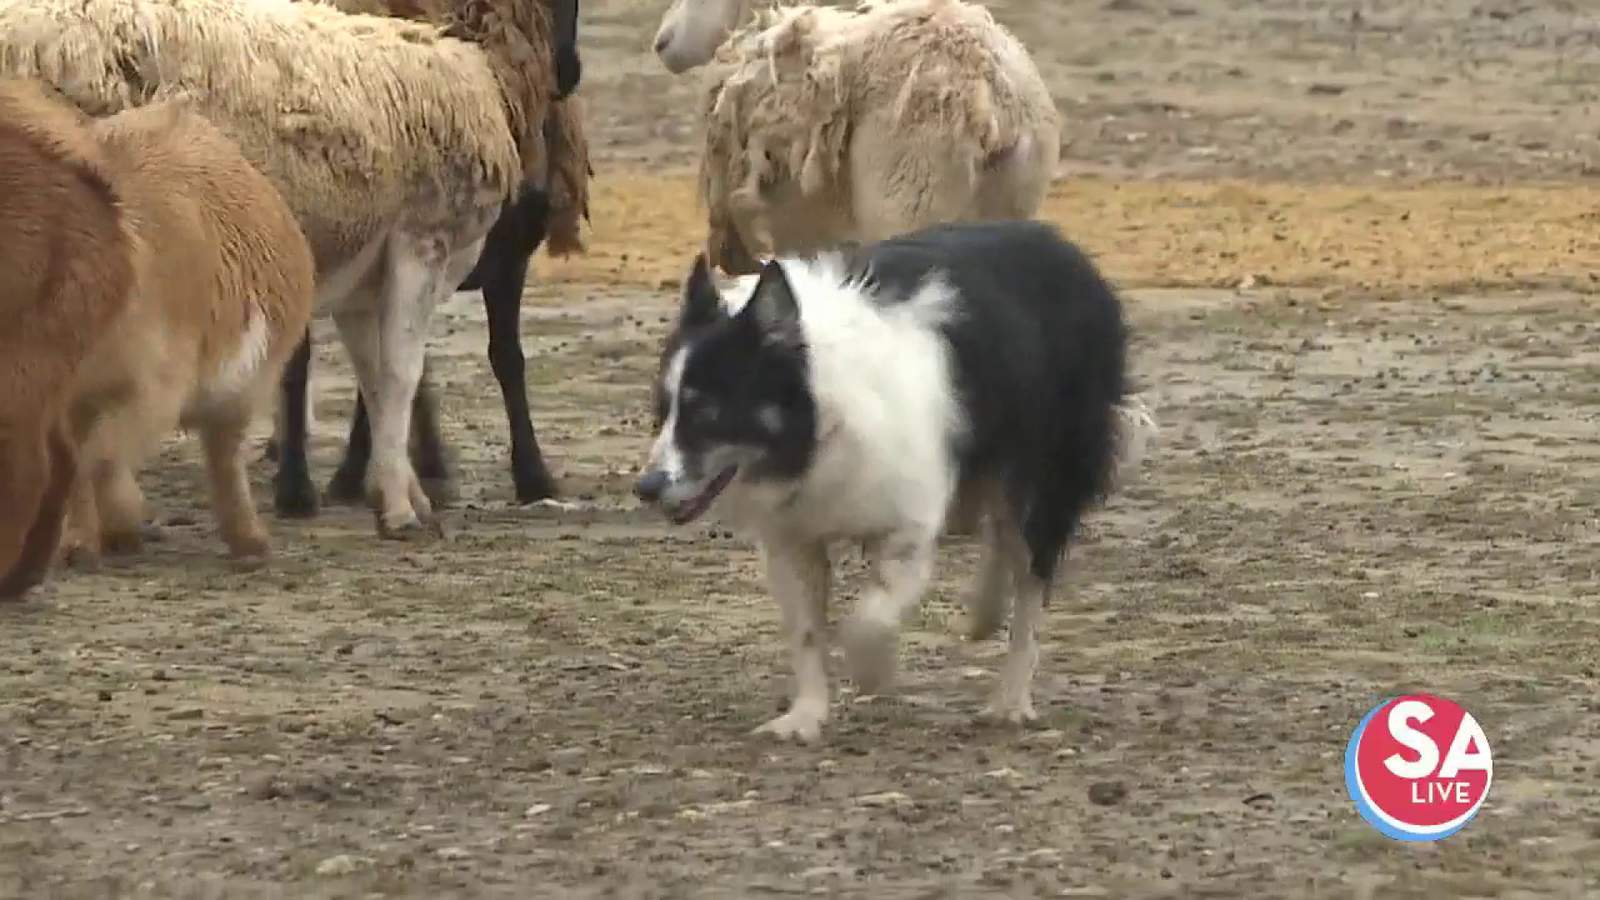 A sheepdog story with heart